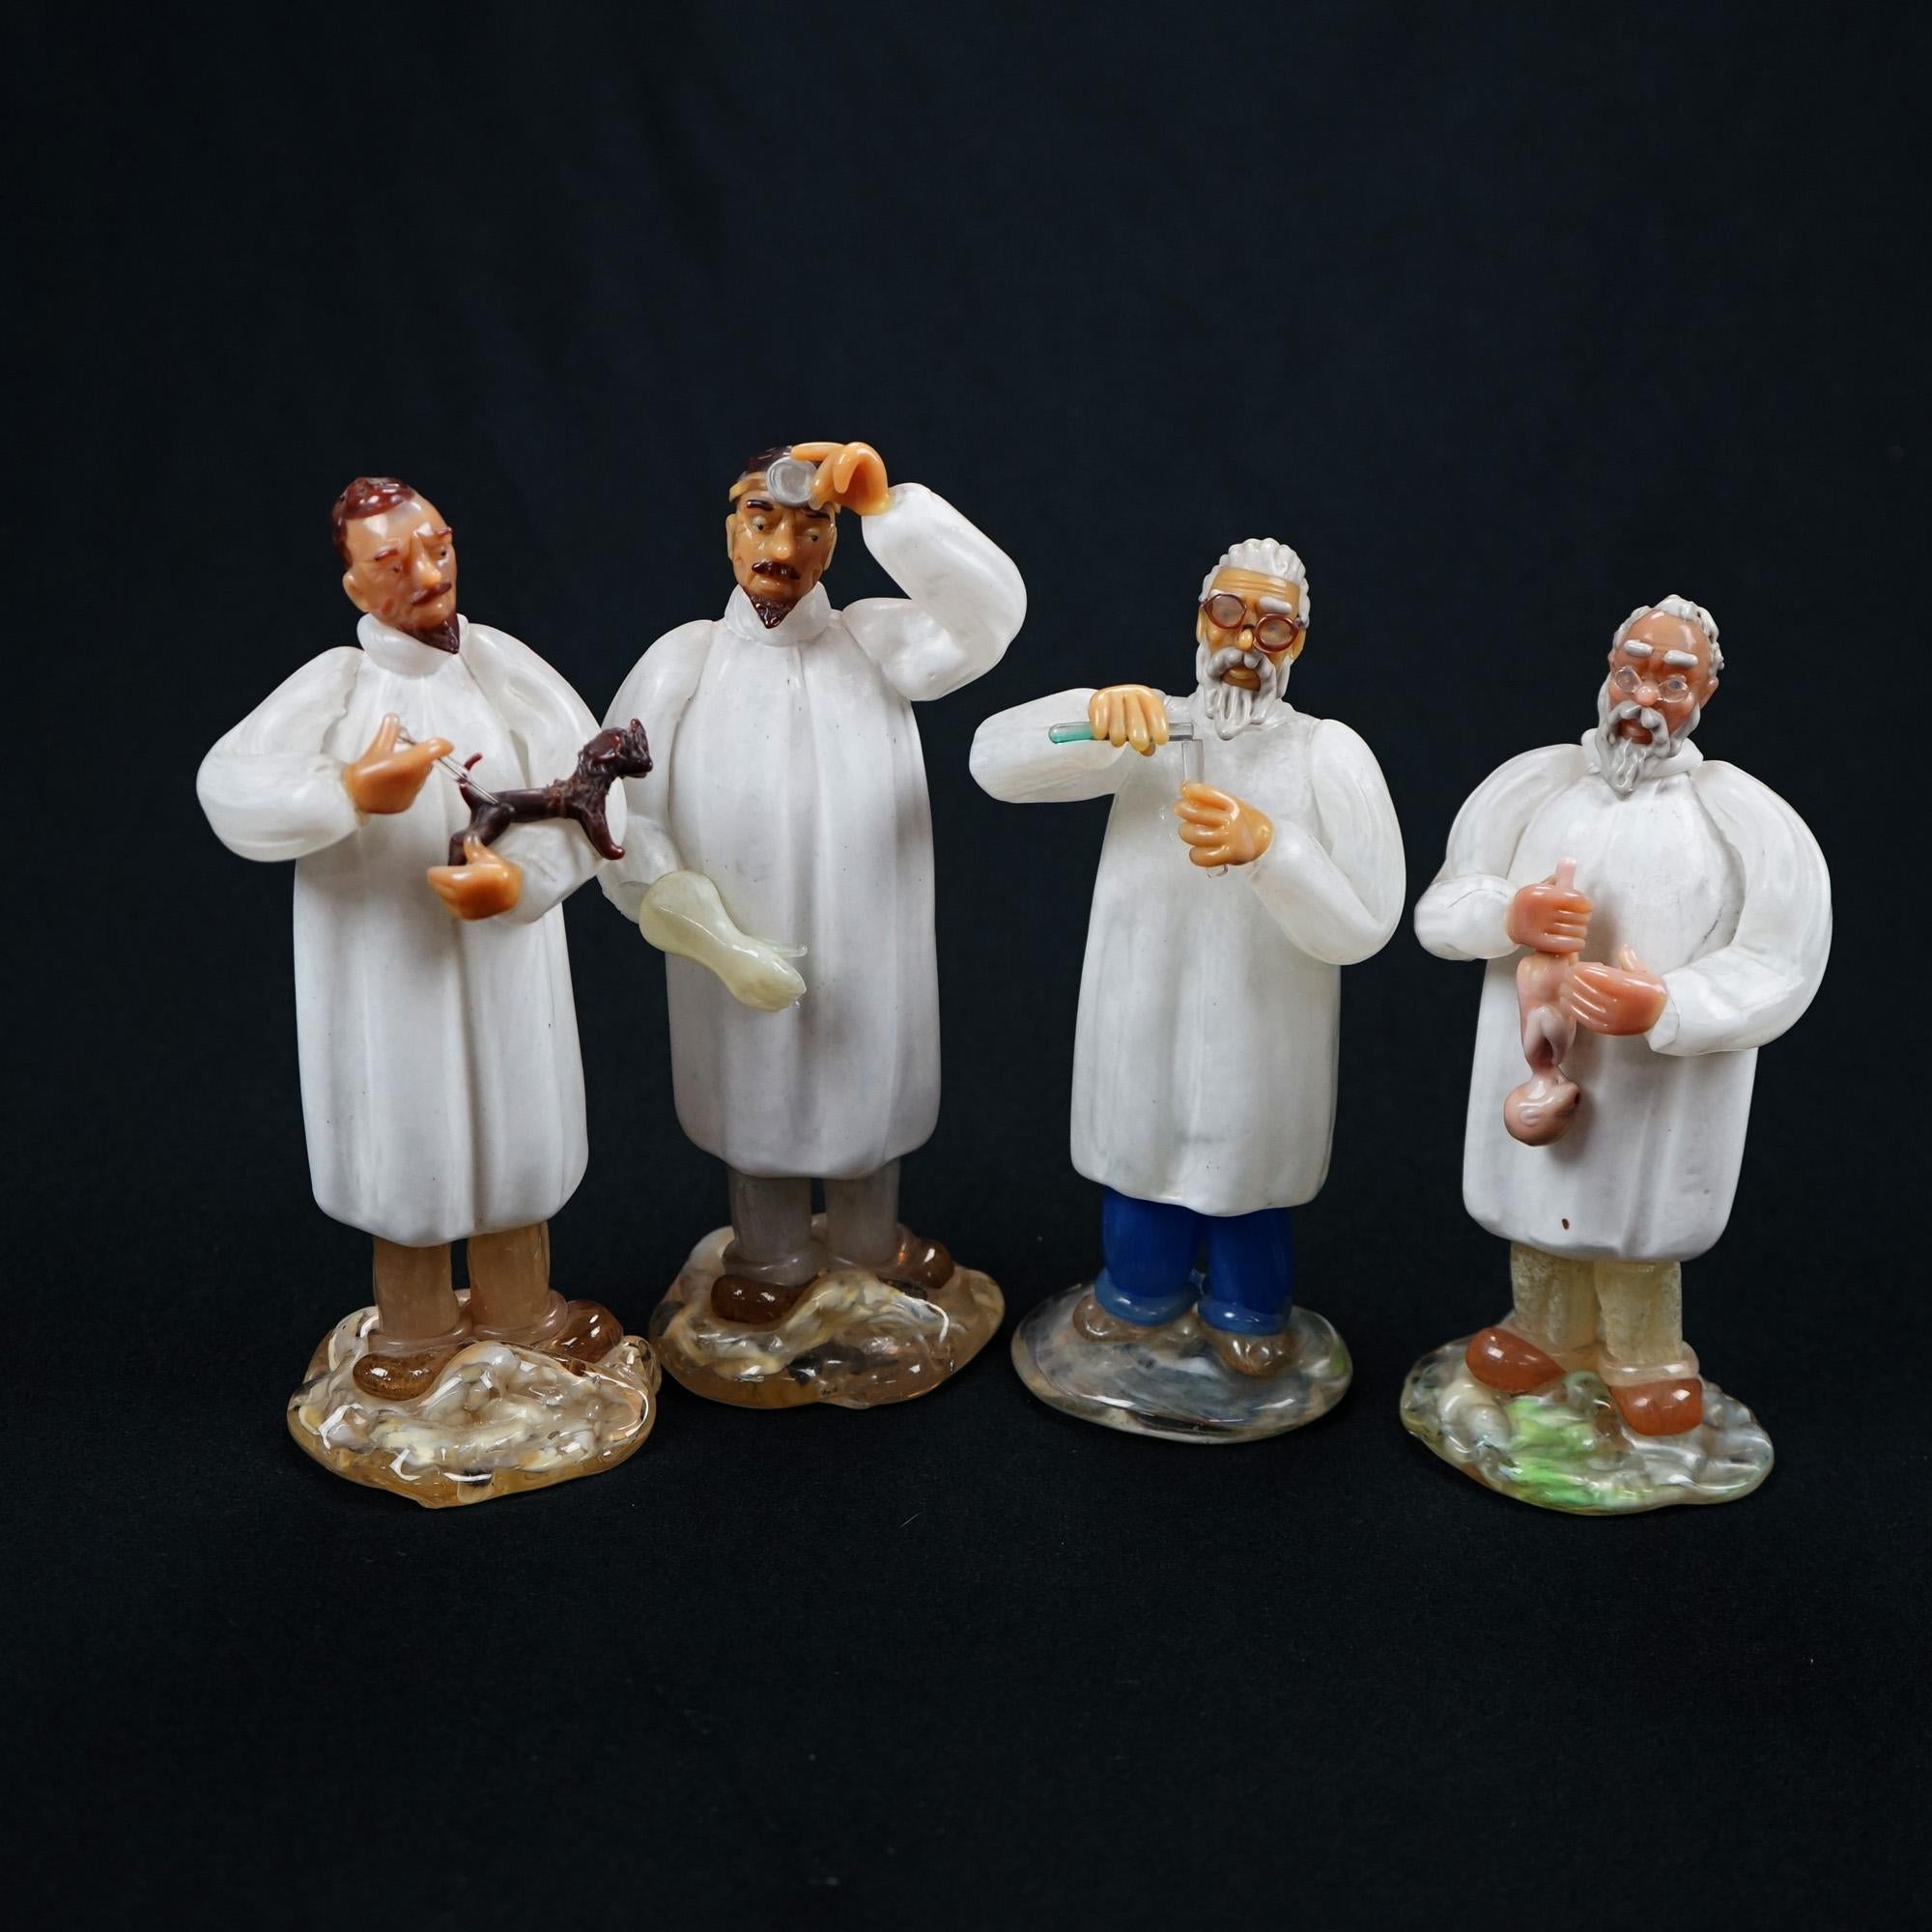 Hand-Crafted Four Arcadia Czech Murano Art Glass Figurines of Medical Professionals, 20th C